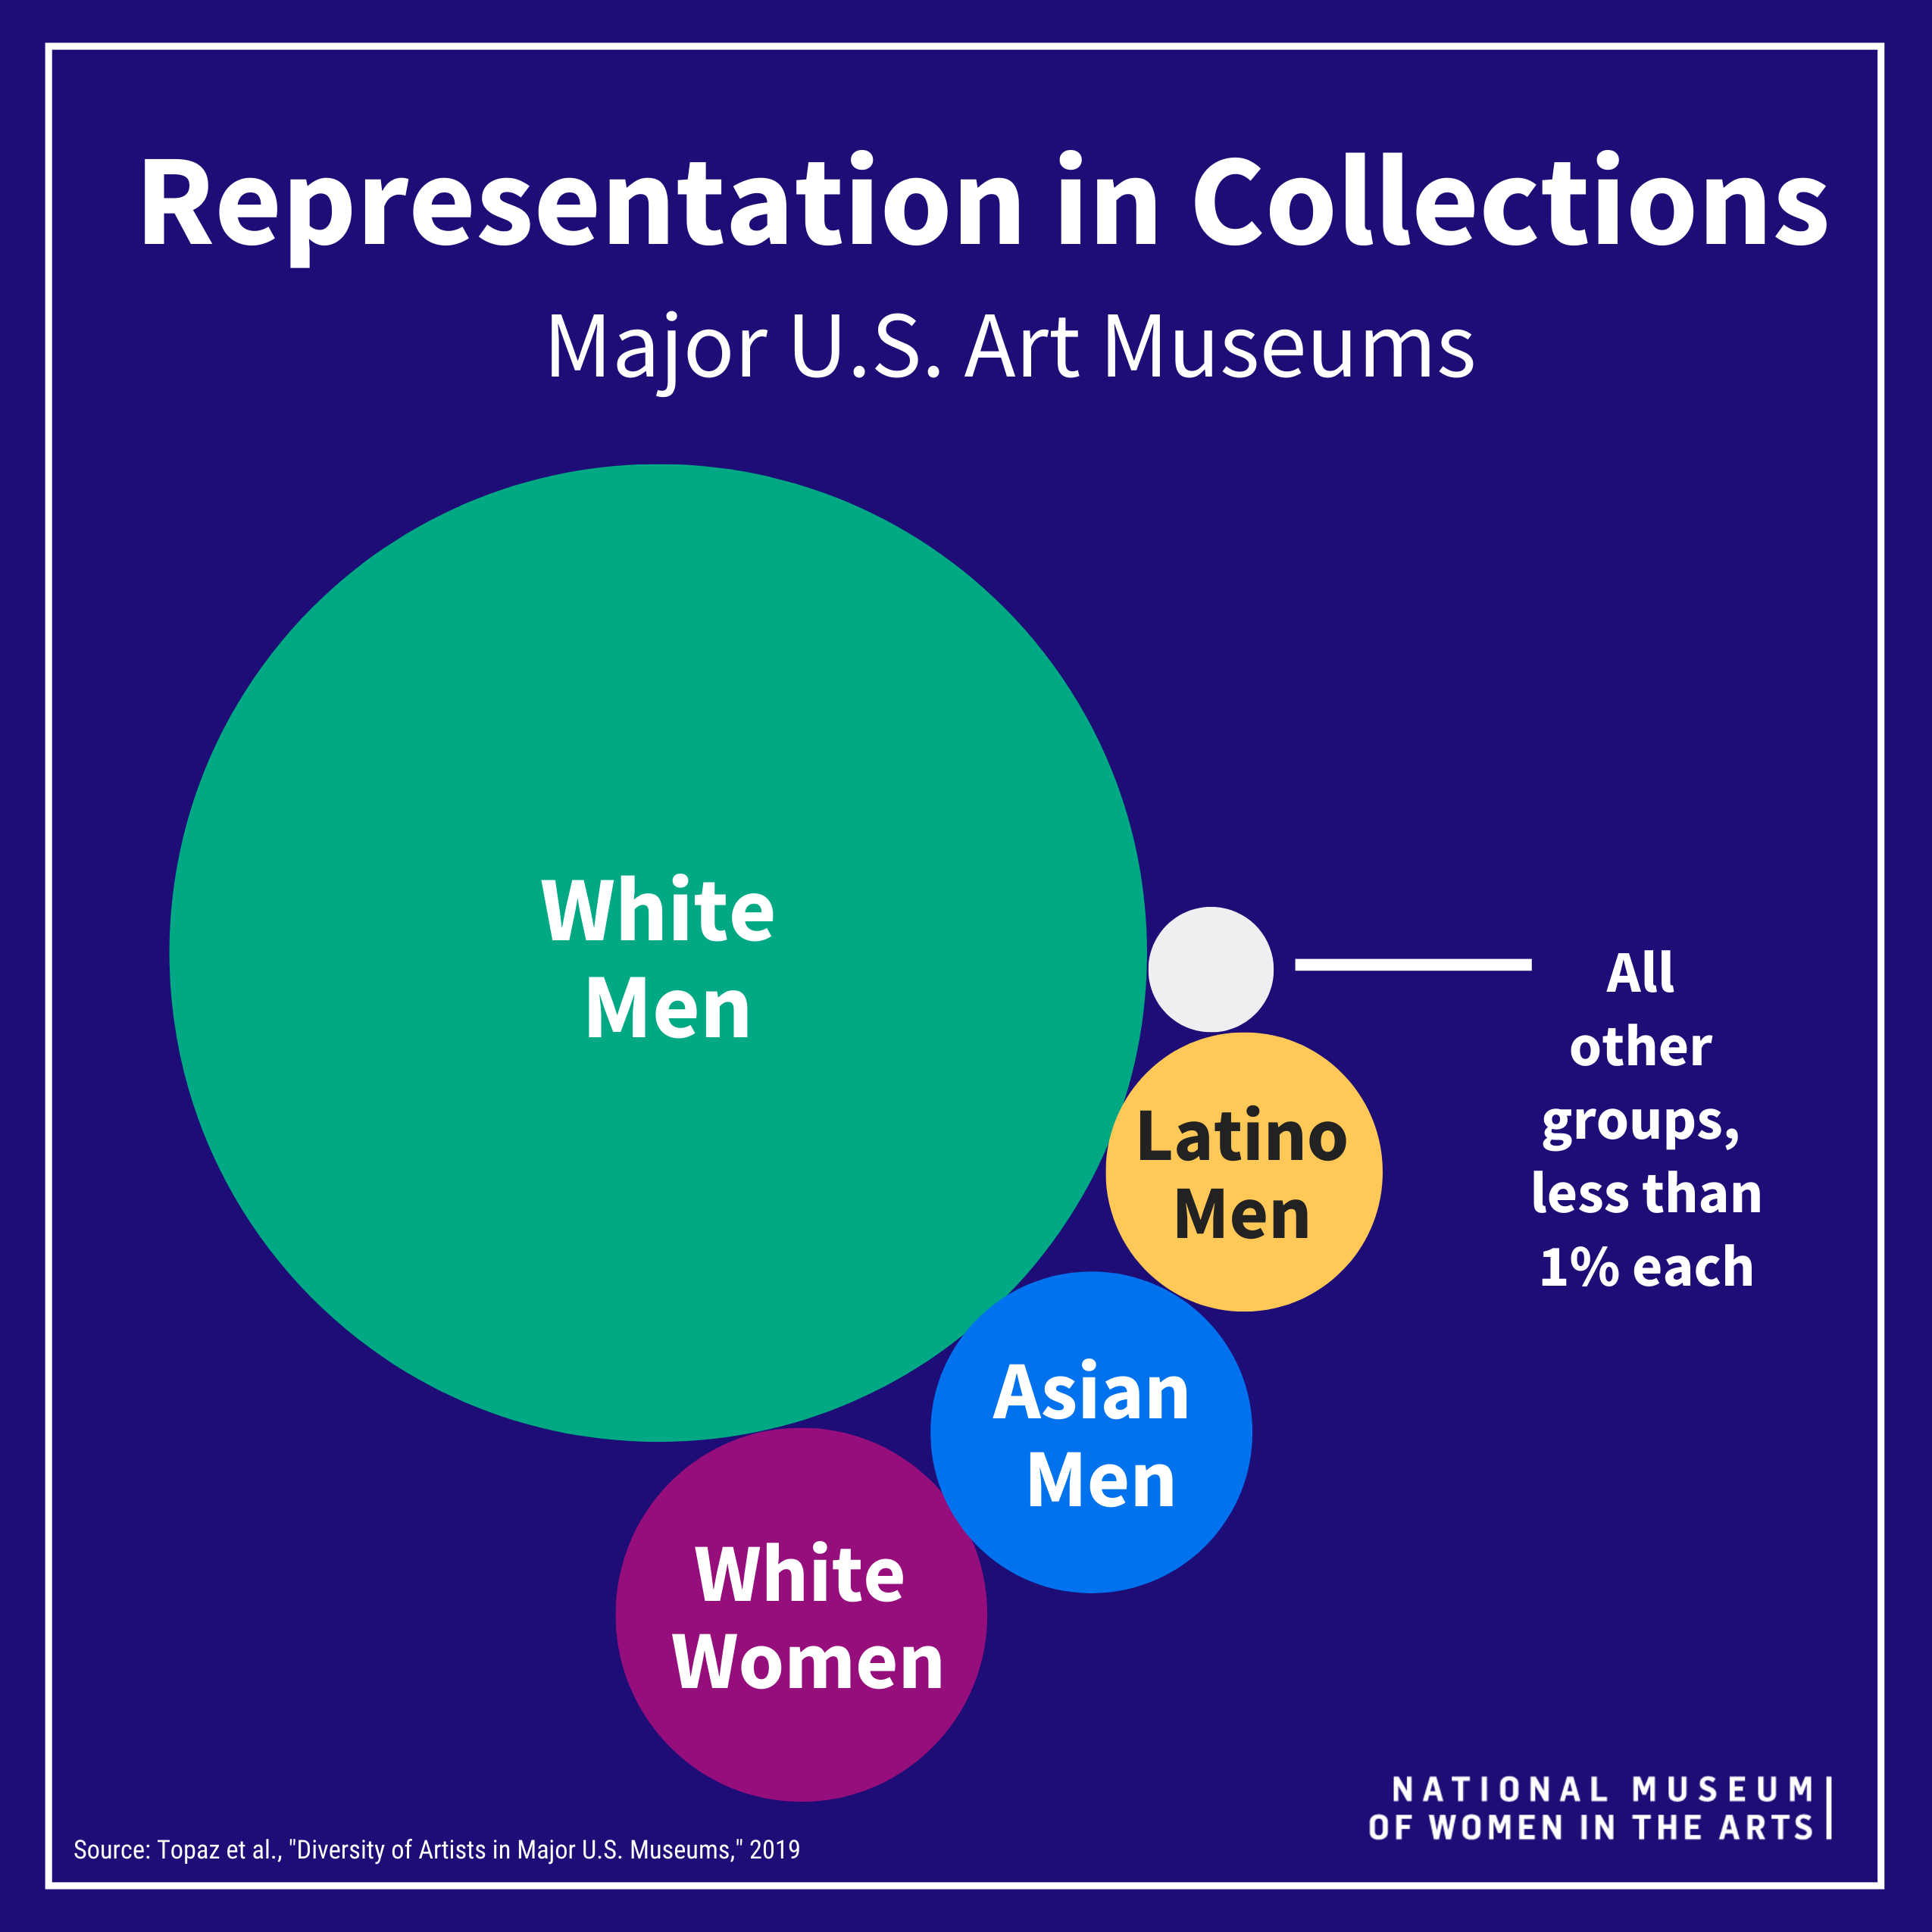 A circle chart for Representation in Collections of Major U.S. Art Museums, with the logo of the National Museum of Women in the Arts and the text 'Source: Topaz et al., 'Diversity in Major U.S. Museums,' 2019' at the bottom. The largest circle by far represents white men, then white women, Asian men, Latino men, and then a tiny circle is labeled 'All other groups, less than 1% each.'